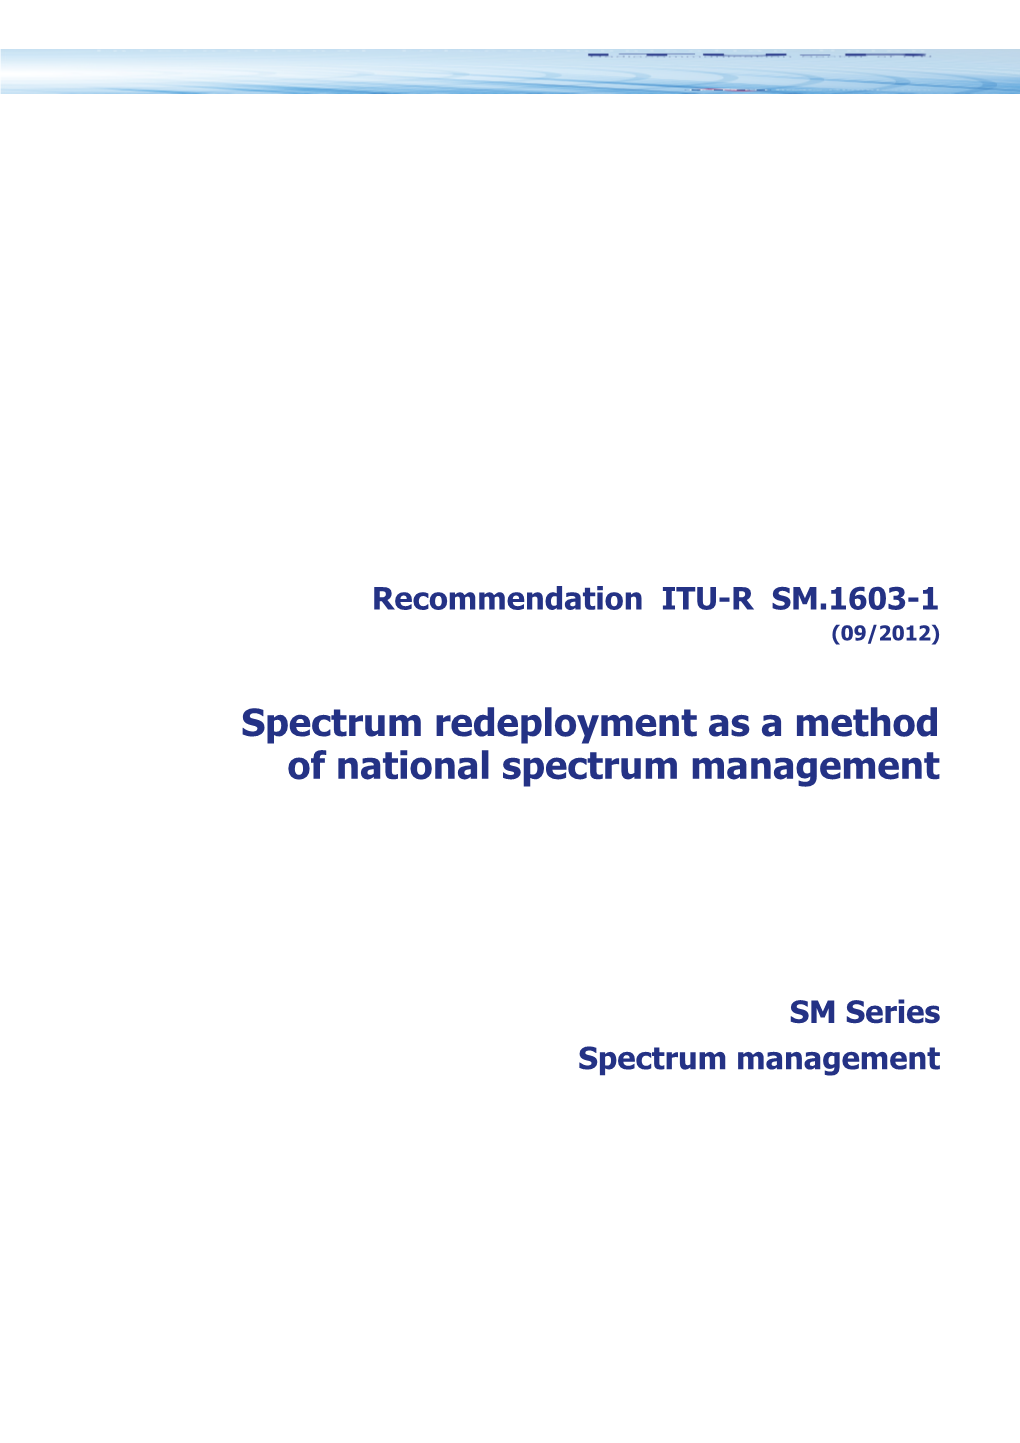 RECOMMENDATION ITU-R SM.1603-1 - Spectrum Redeployment* As a Method of National Spectrum